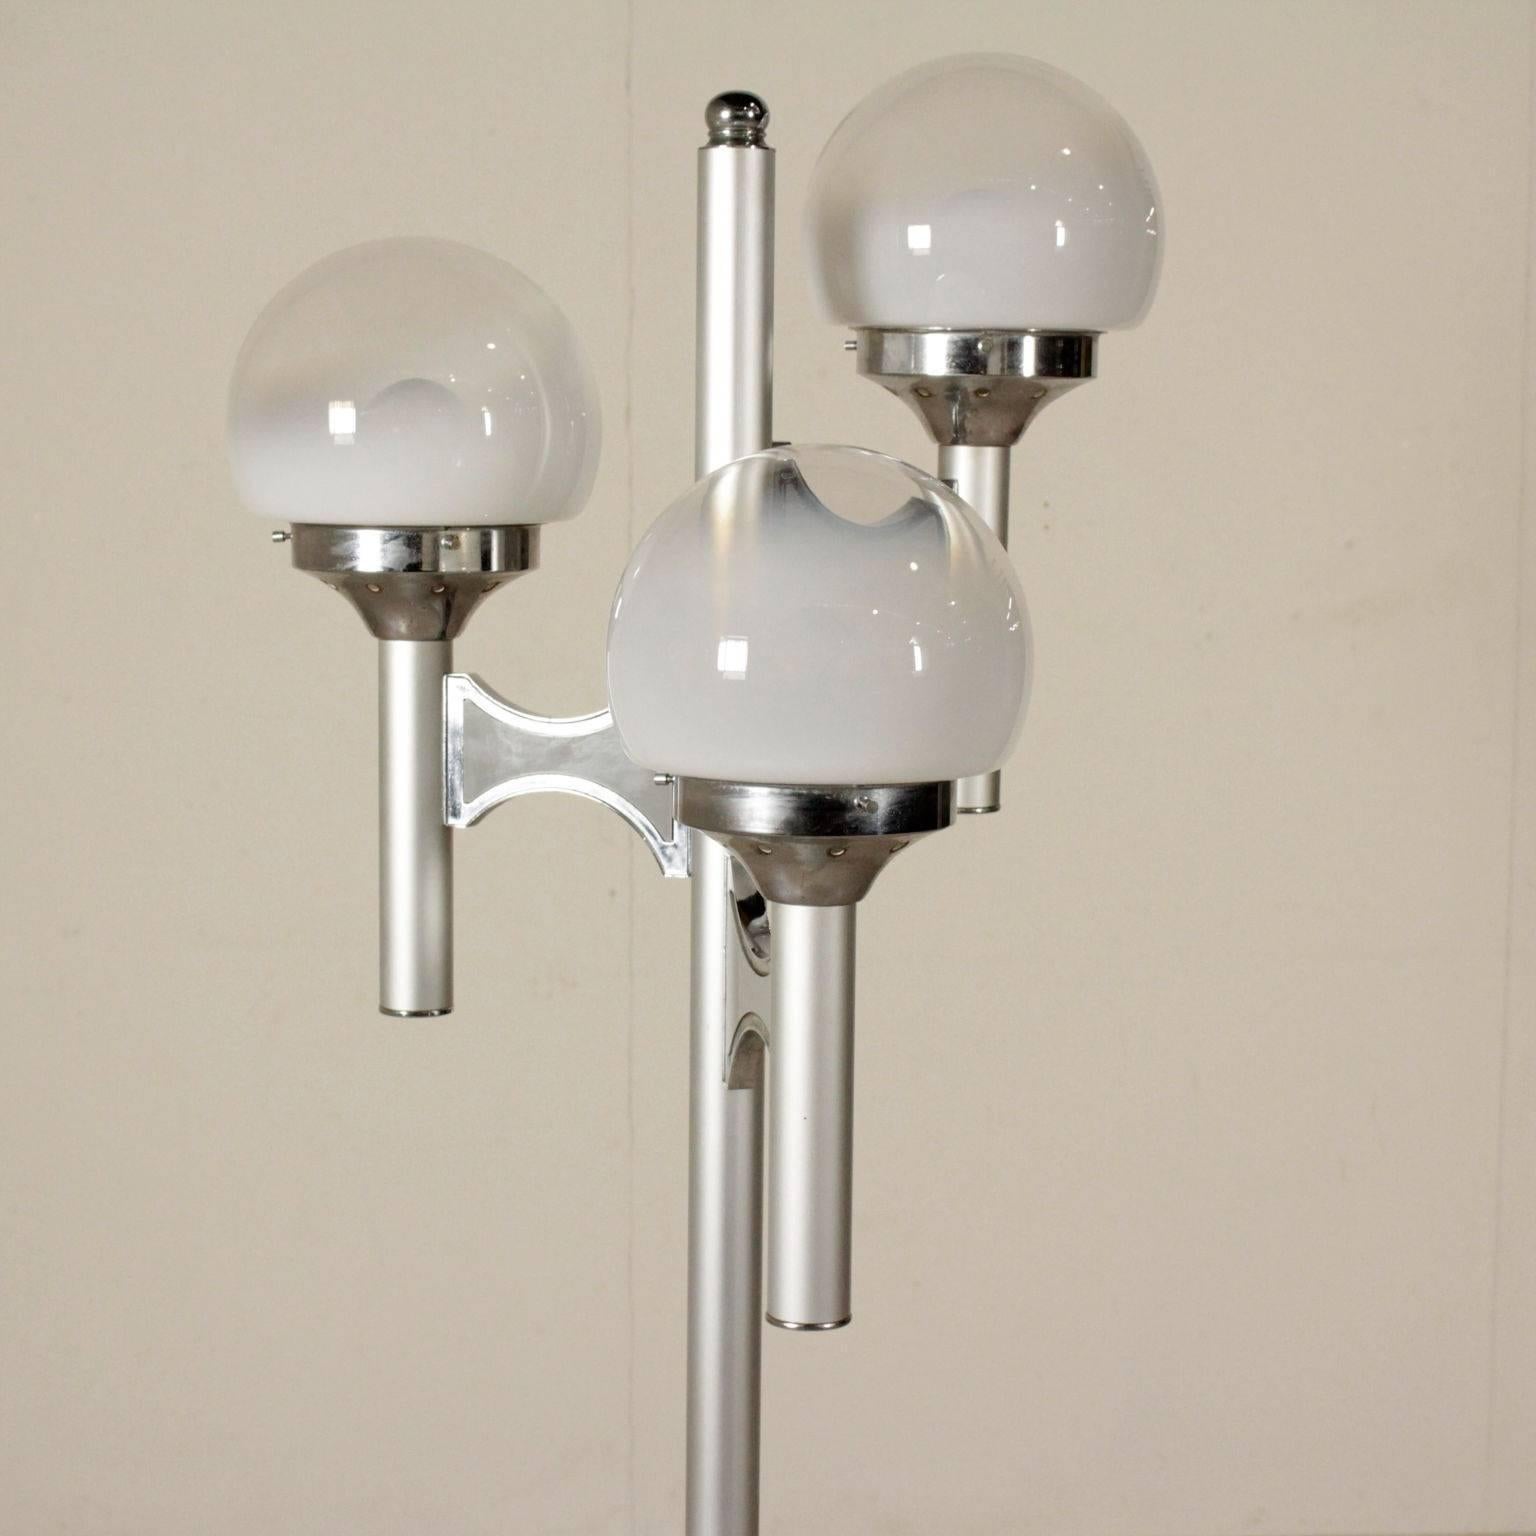 A vintage floor lamp in aluminium, metal and glass. Manufactured in Italy, 1960s-1970s.